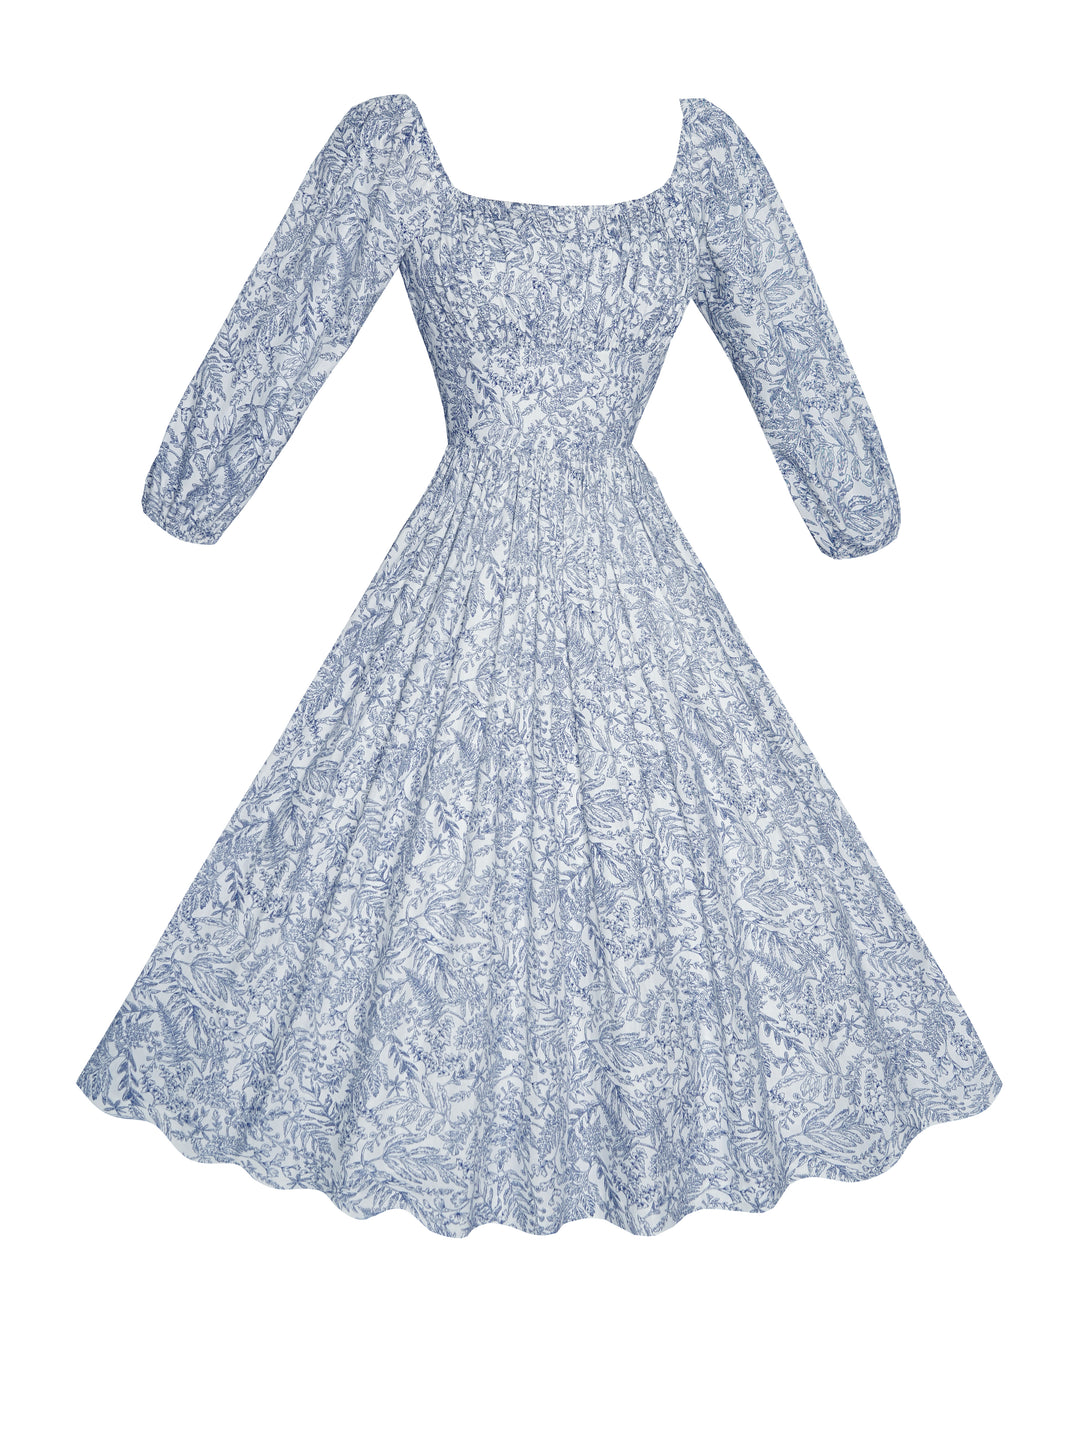 MTO - Sydney Dress in Navy "French Countryside" Toile